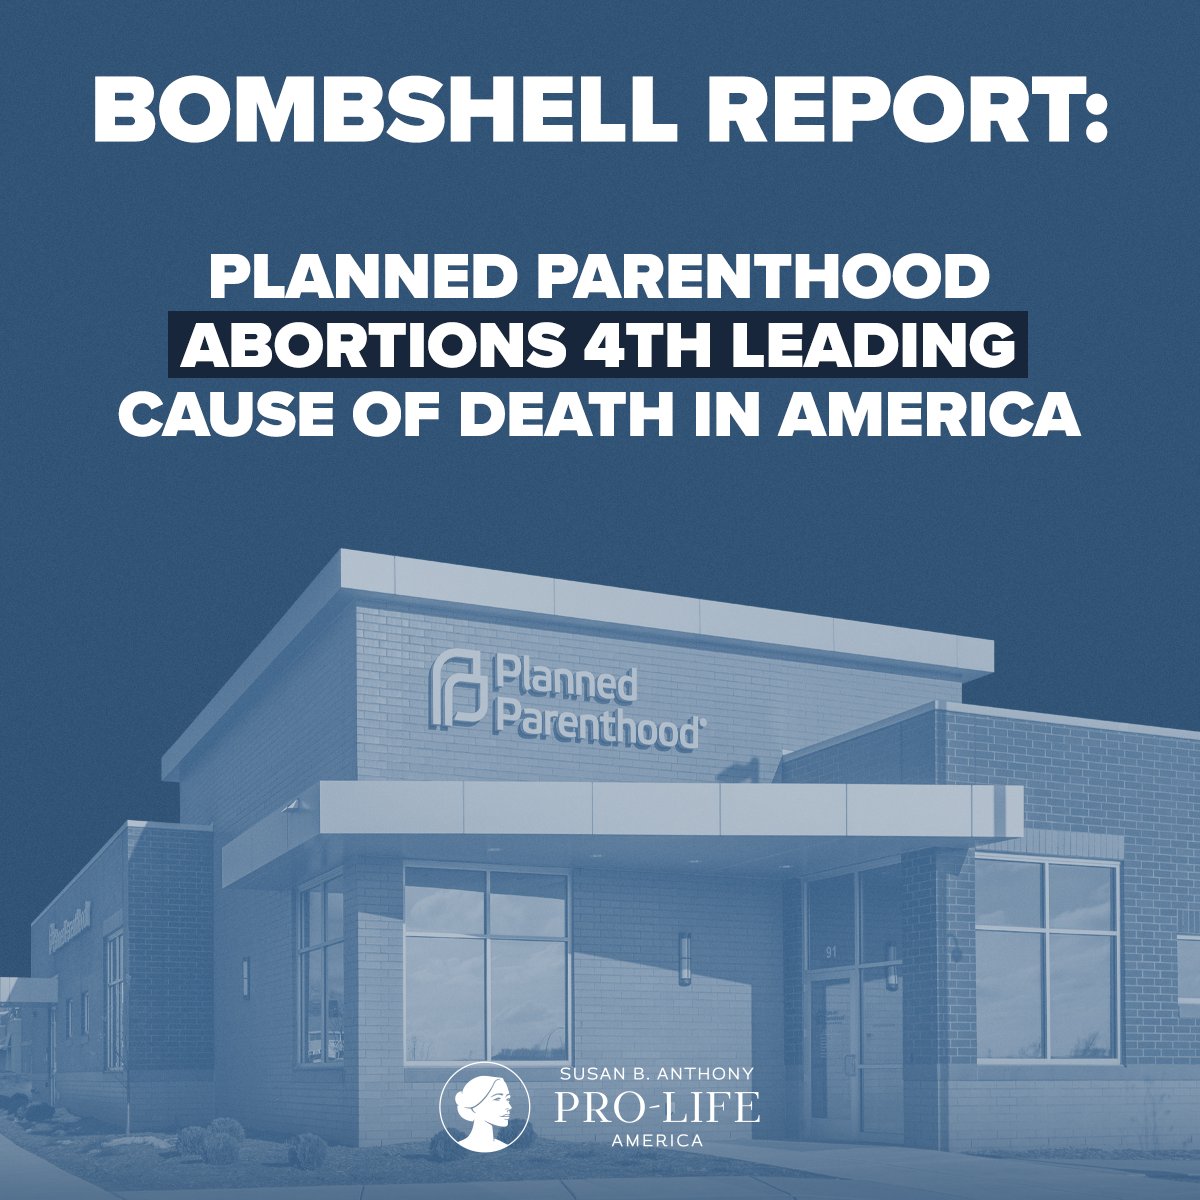 Bombshell Report: Planned Parenthood Abortions 4th Leading Cause of Death in America.